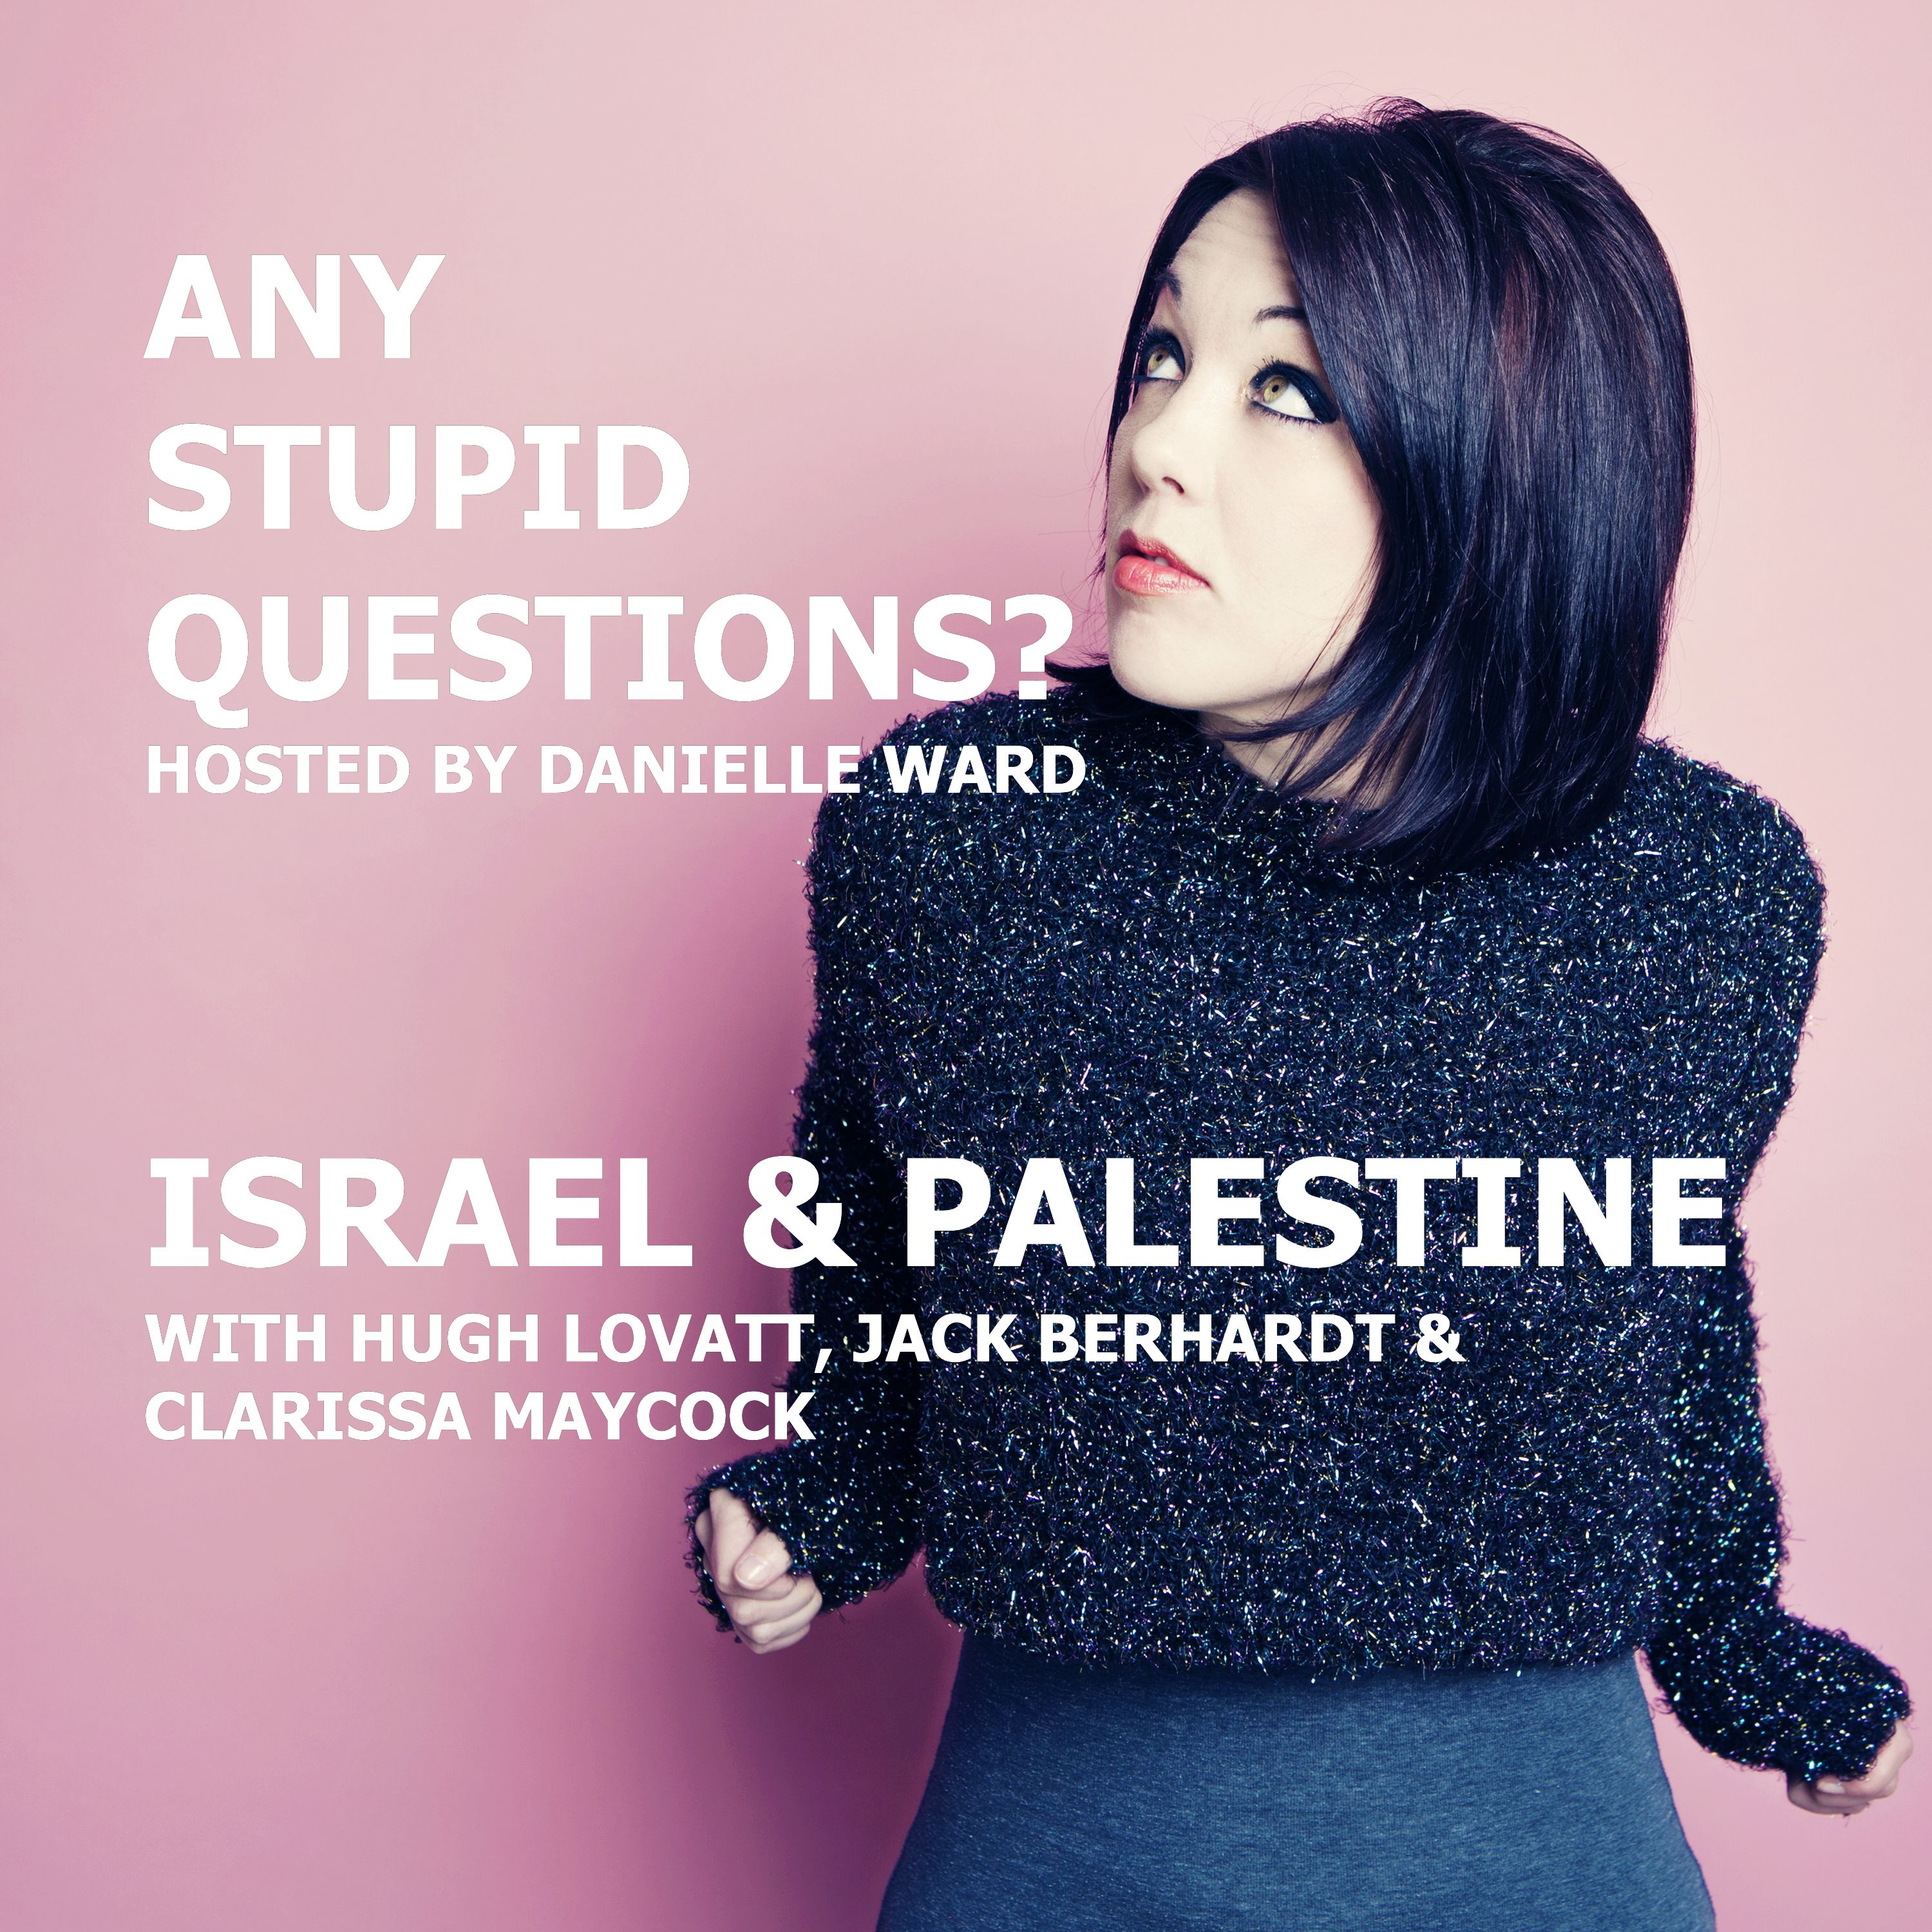 Any Stupid Questions about... Israel & Palestine?